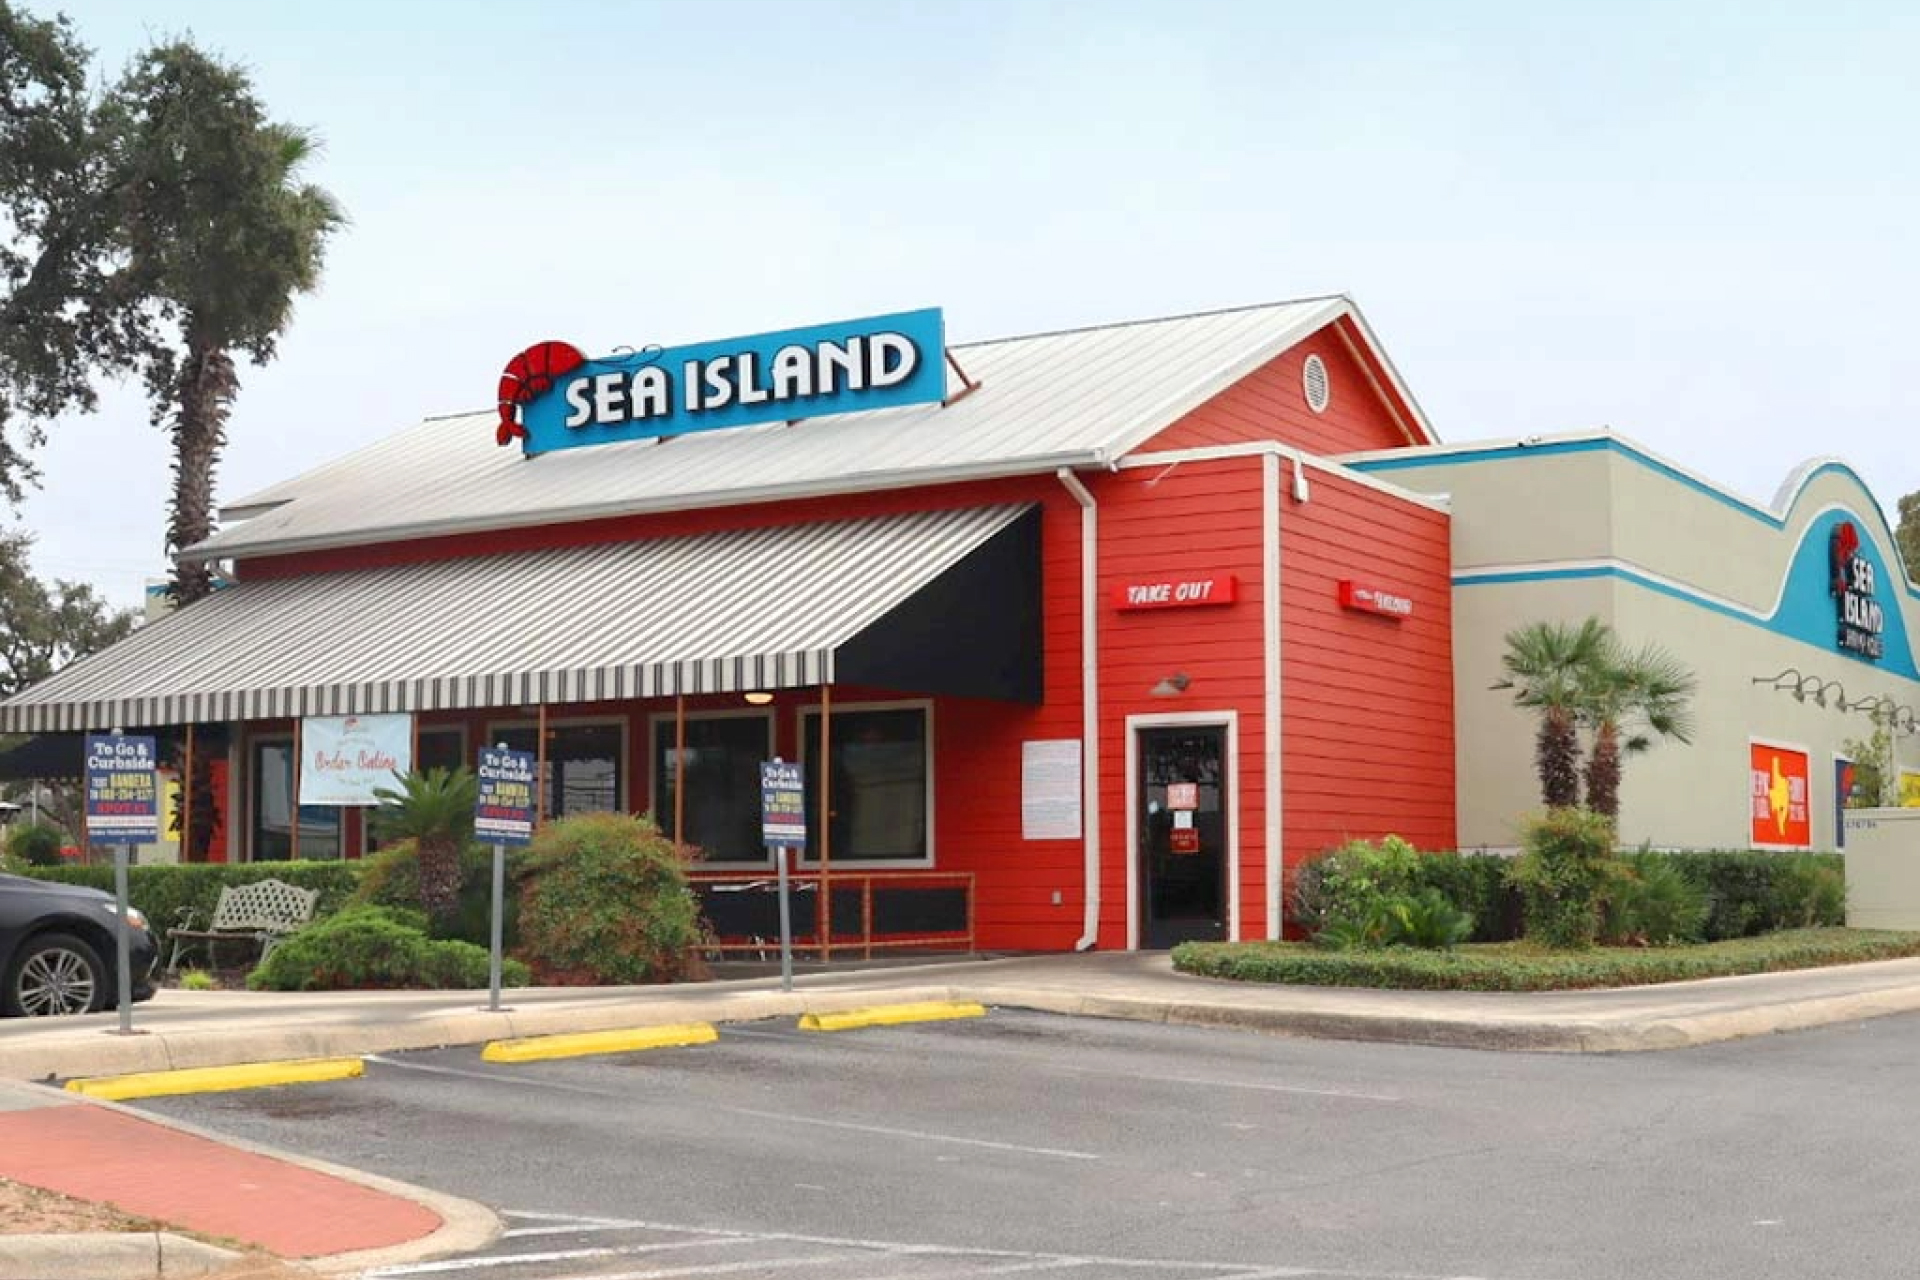 Featured image for Sea Island location at Bandera & 1604.